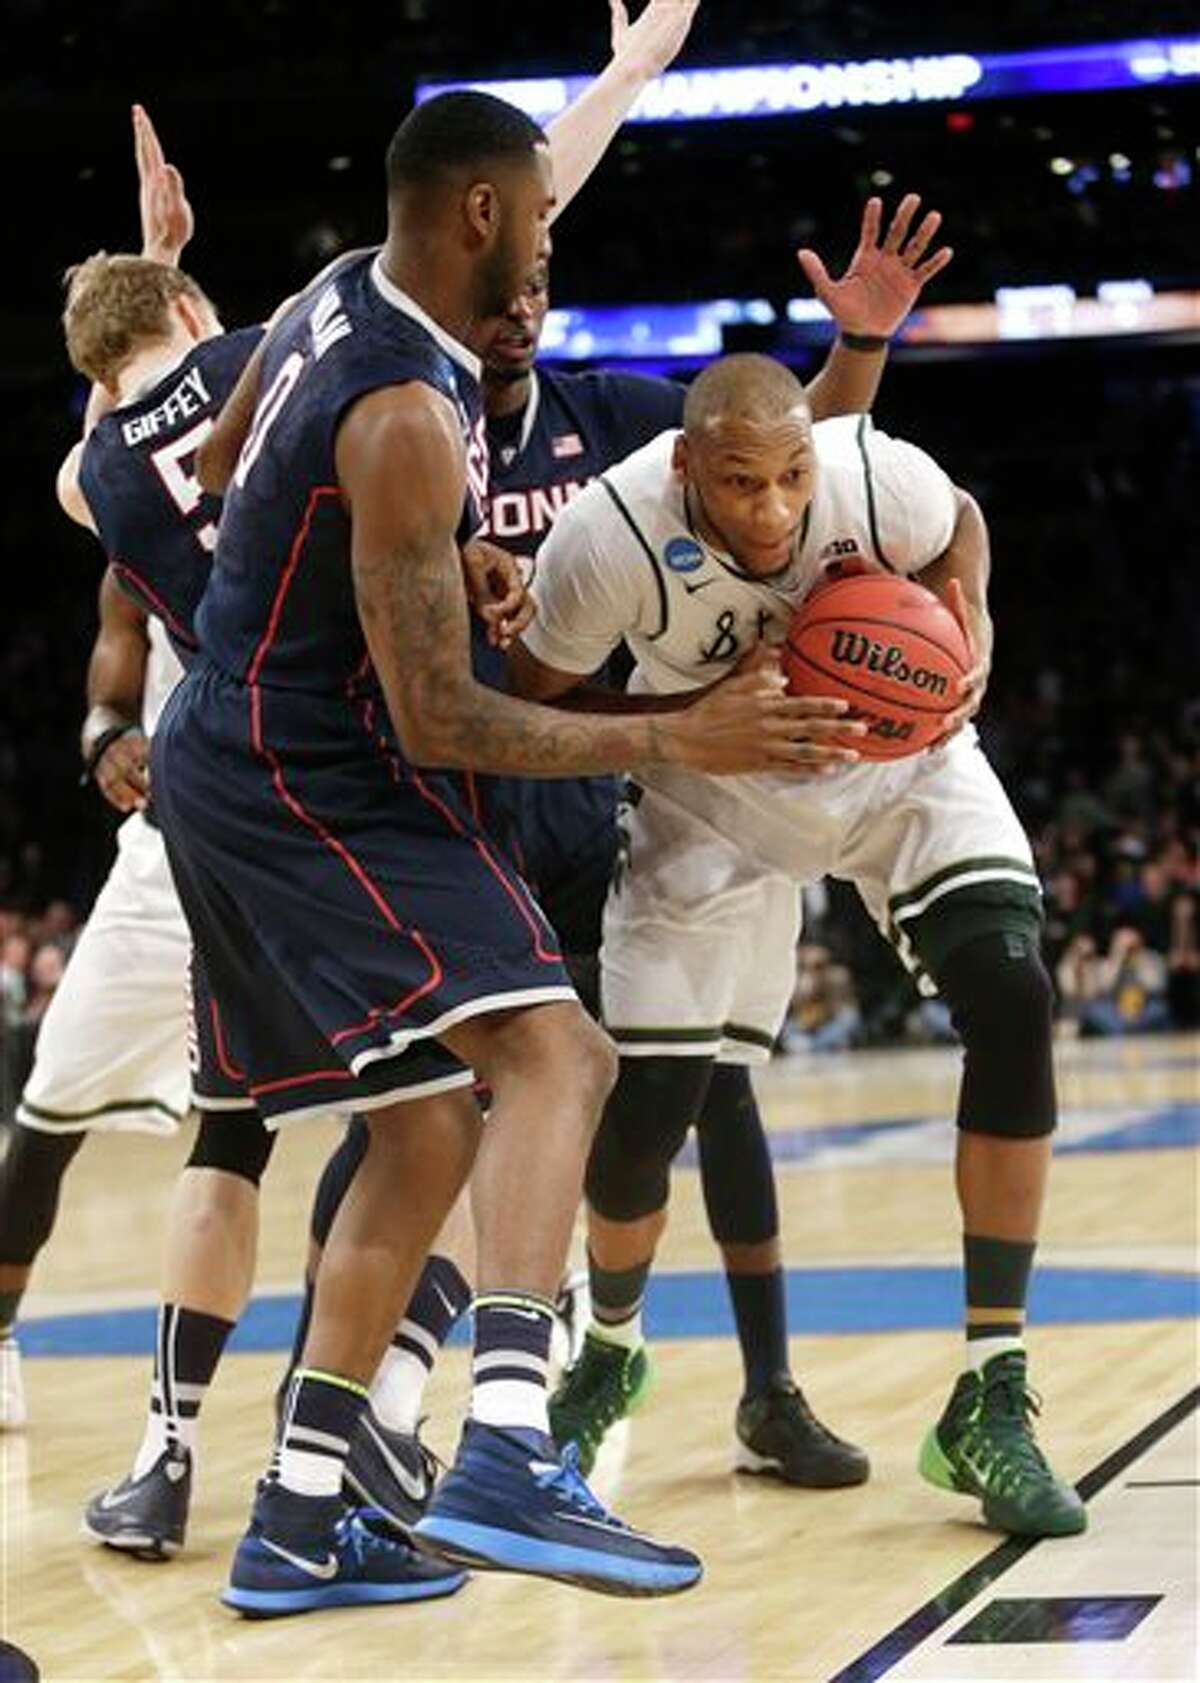 Michigan State's Adreian Payne, right, tries to move the ball past Connecticut's Phillip Nolan in the first half of a regional final at the NCAA college basketball tournament on Sunday, March 30, 2014, in New York. (AP Photo/Frank Franklin II)